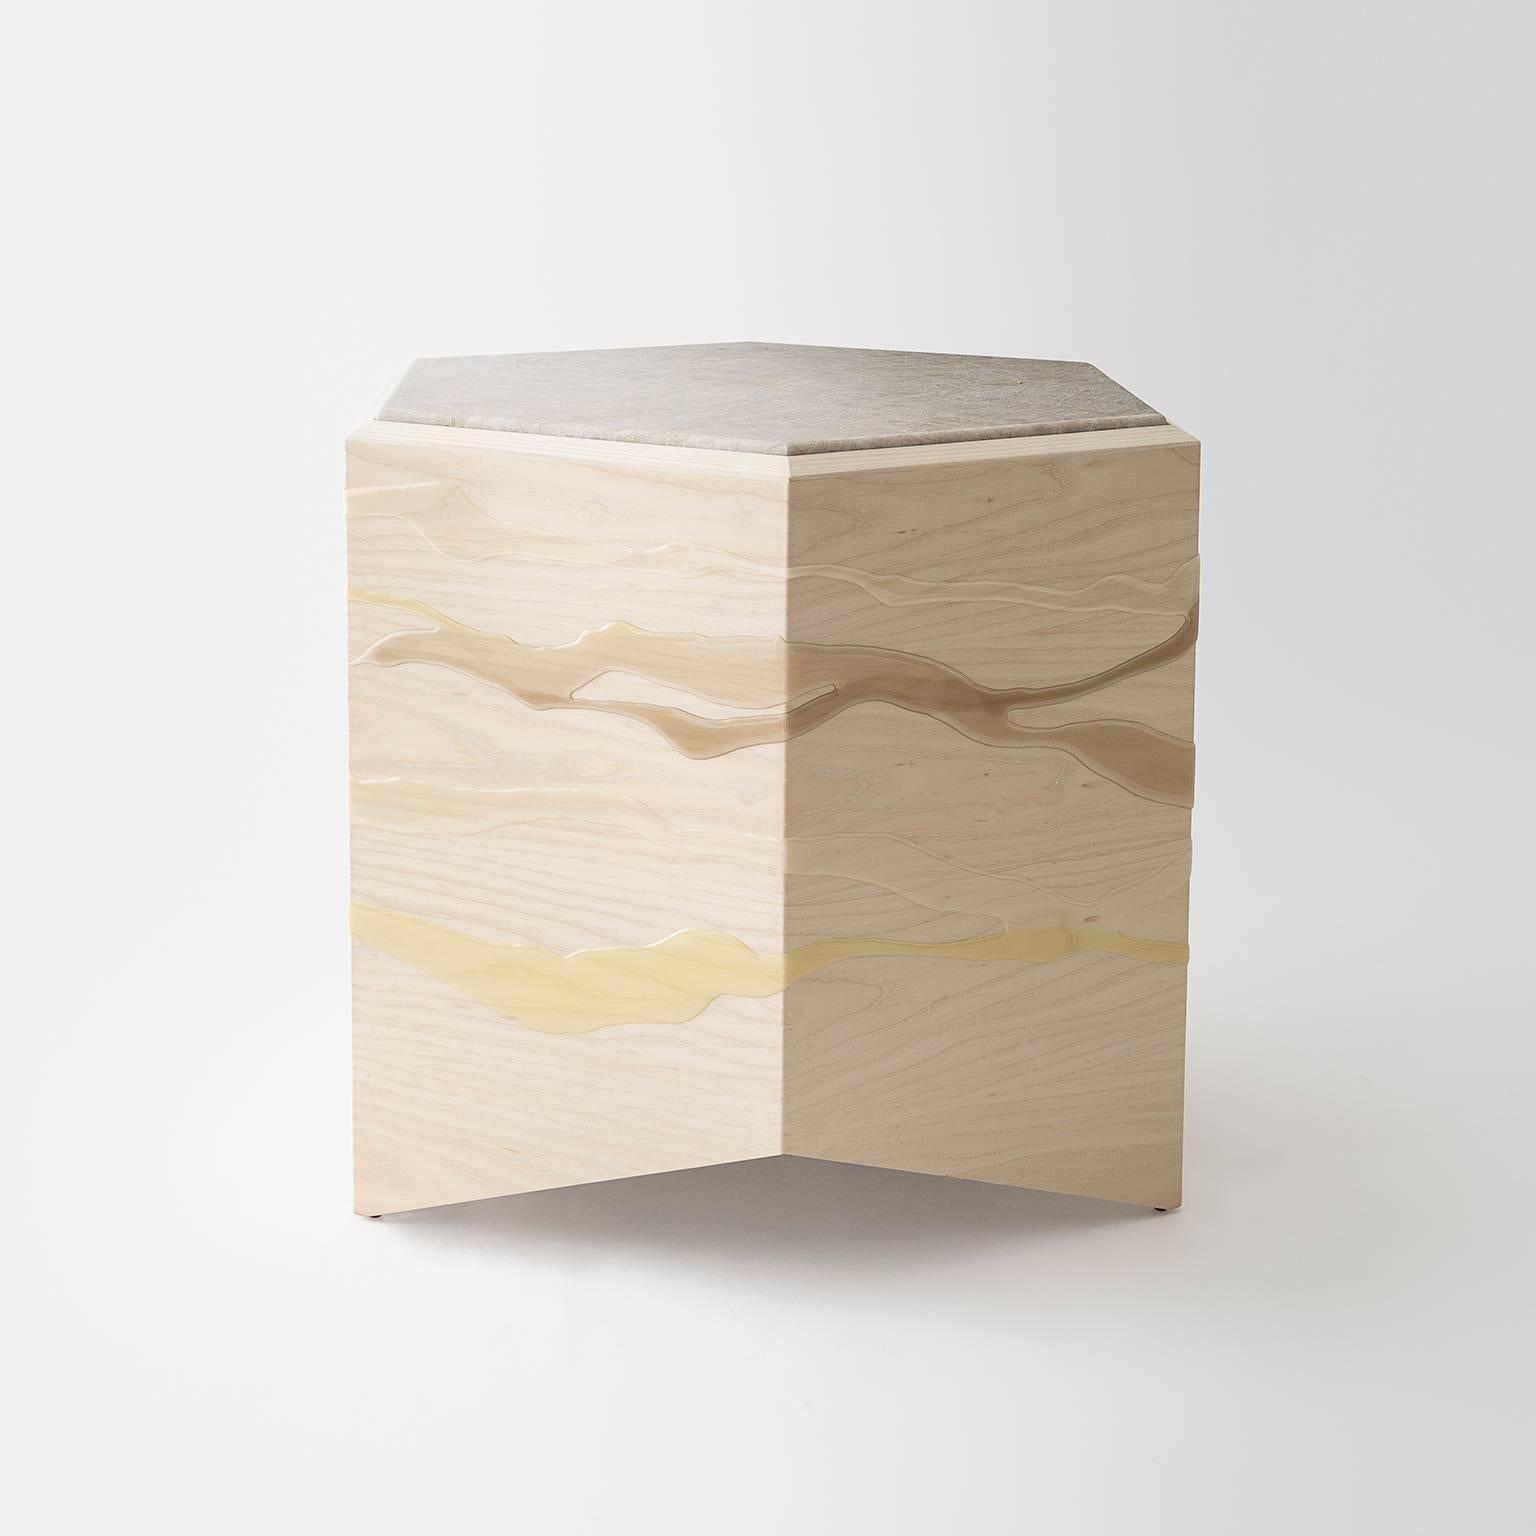 This Drip/Fold side table by Noble Goods is constructed of a single sheet of ash plywood that has been hand-dripped with liquid resin, then bent into a hexagonal shape. This floor model table is finished with a quartzite top, a unique and natural